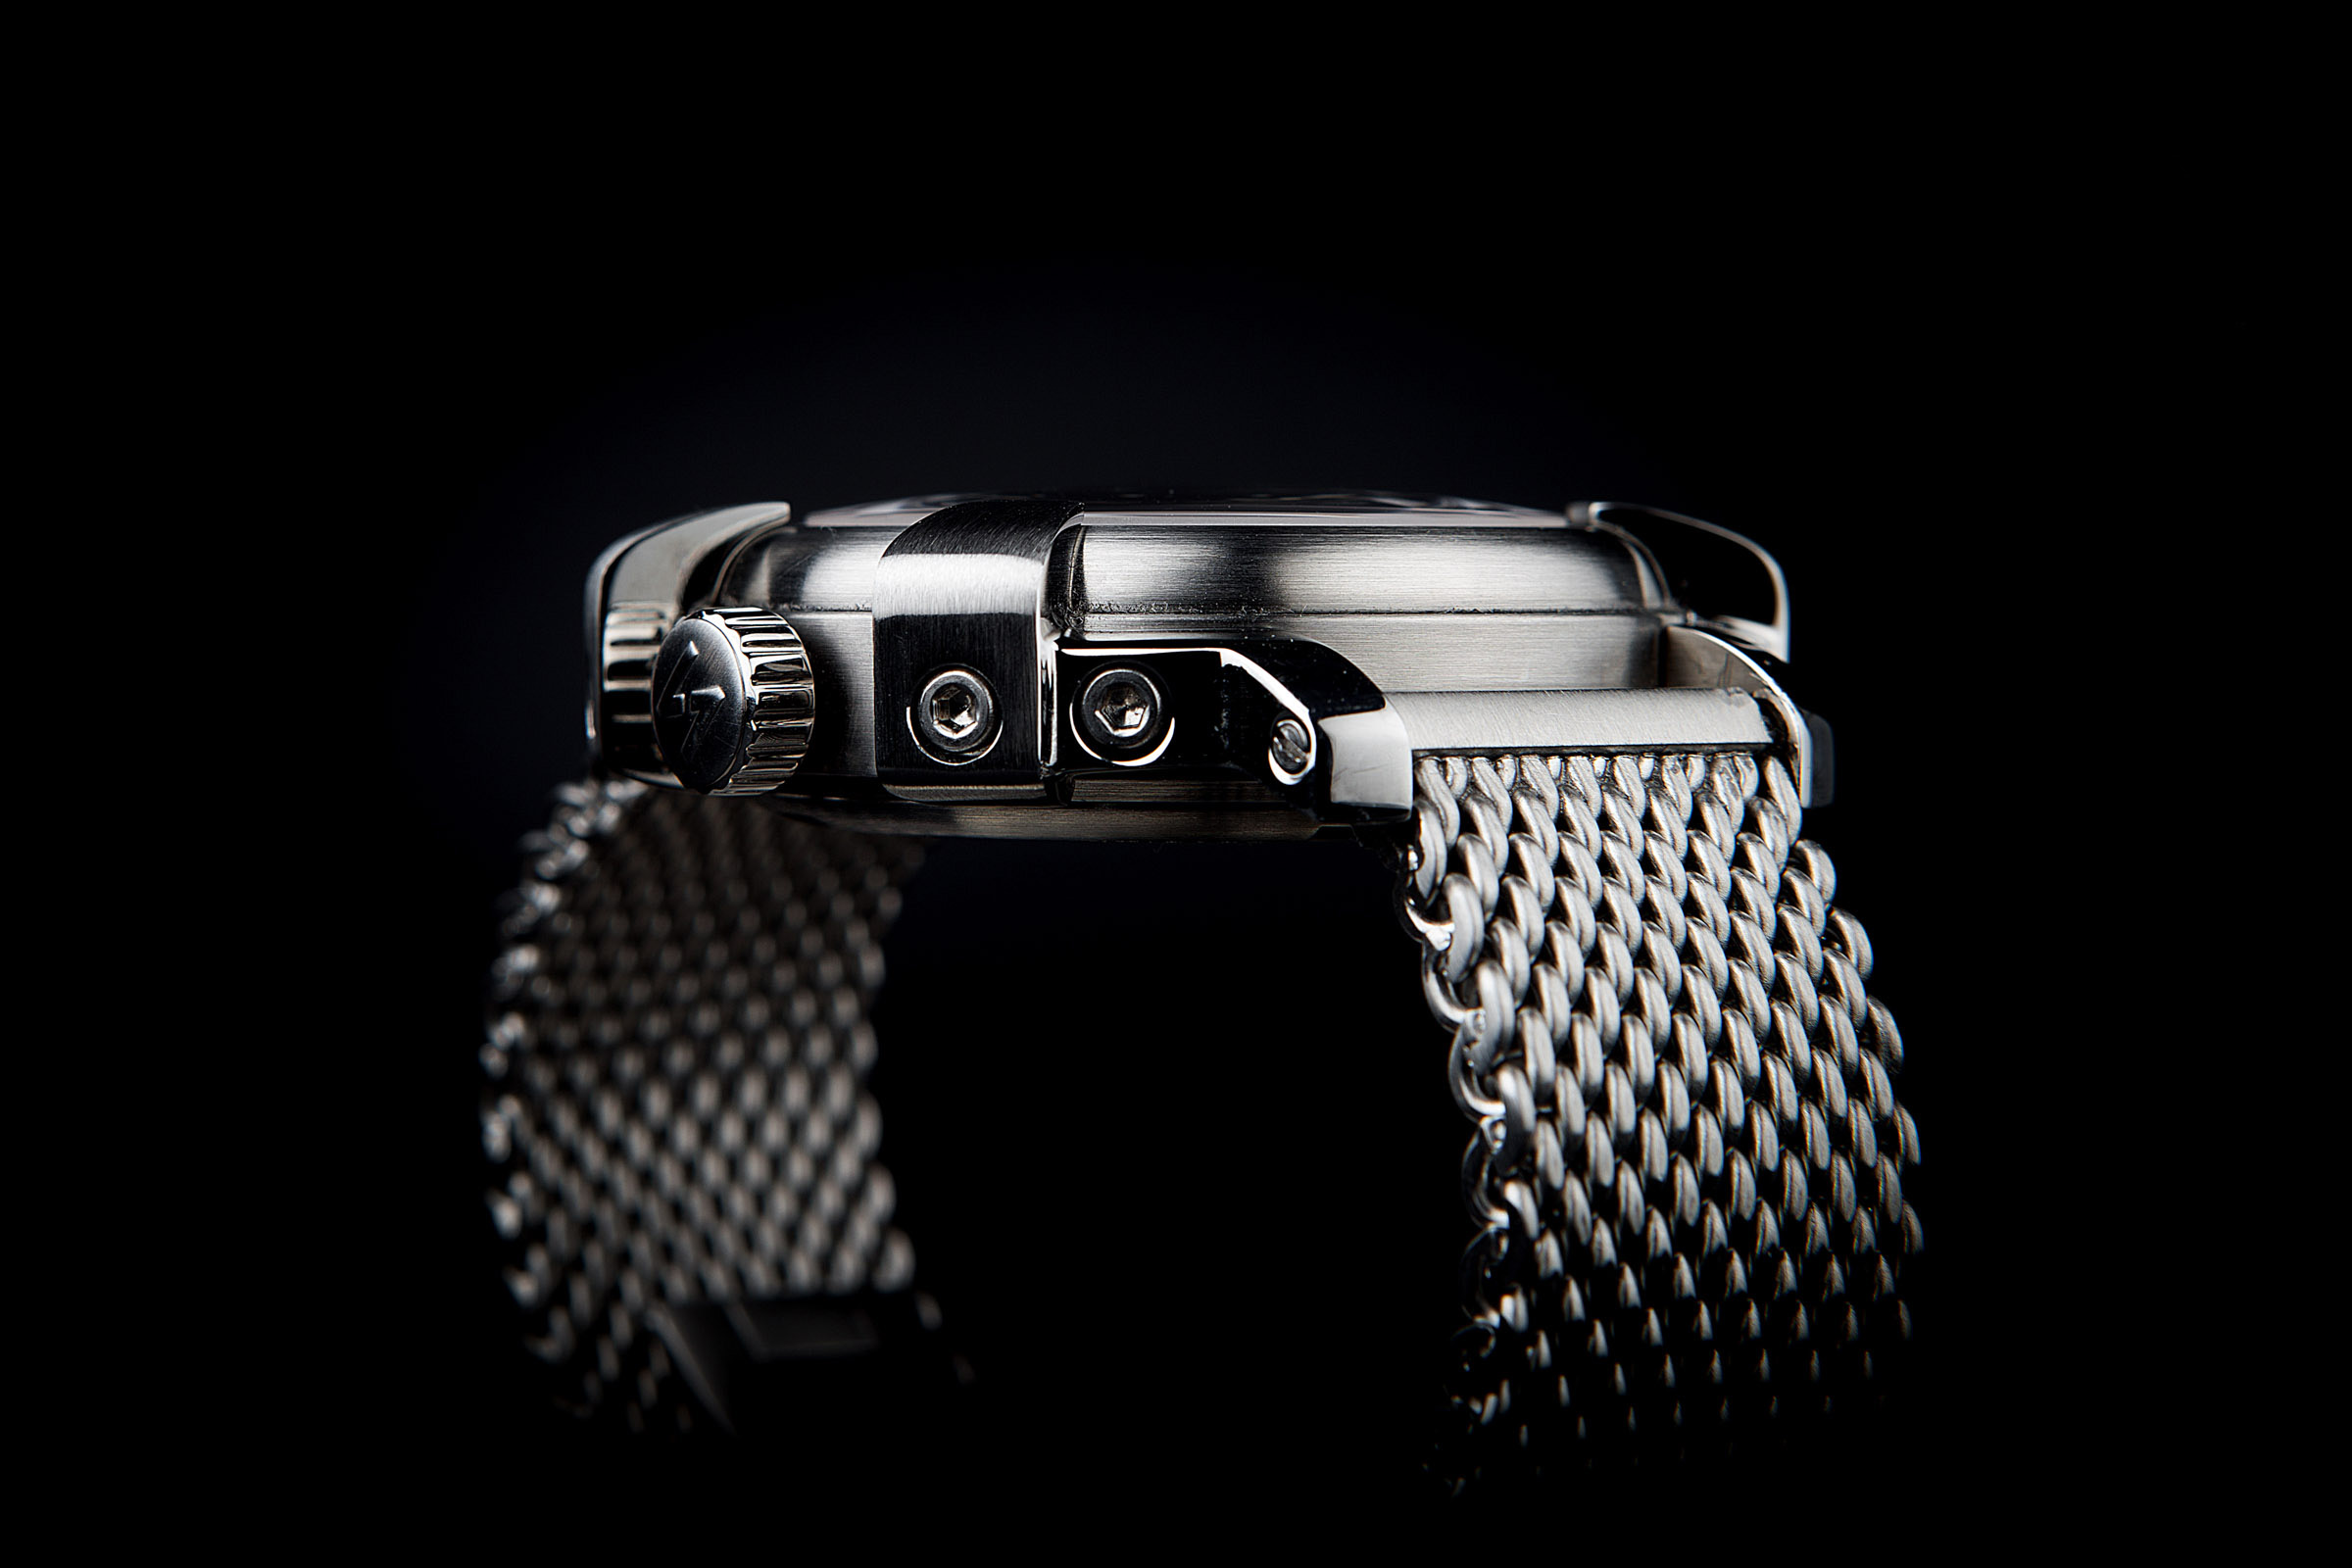 stainless steel watch